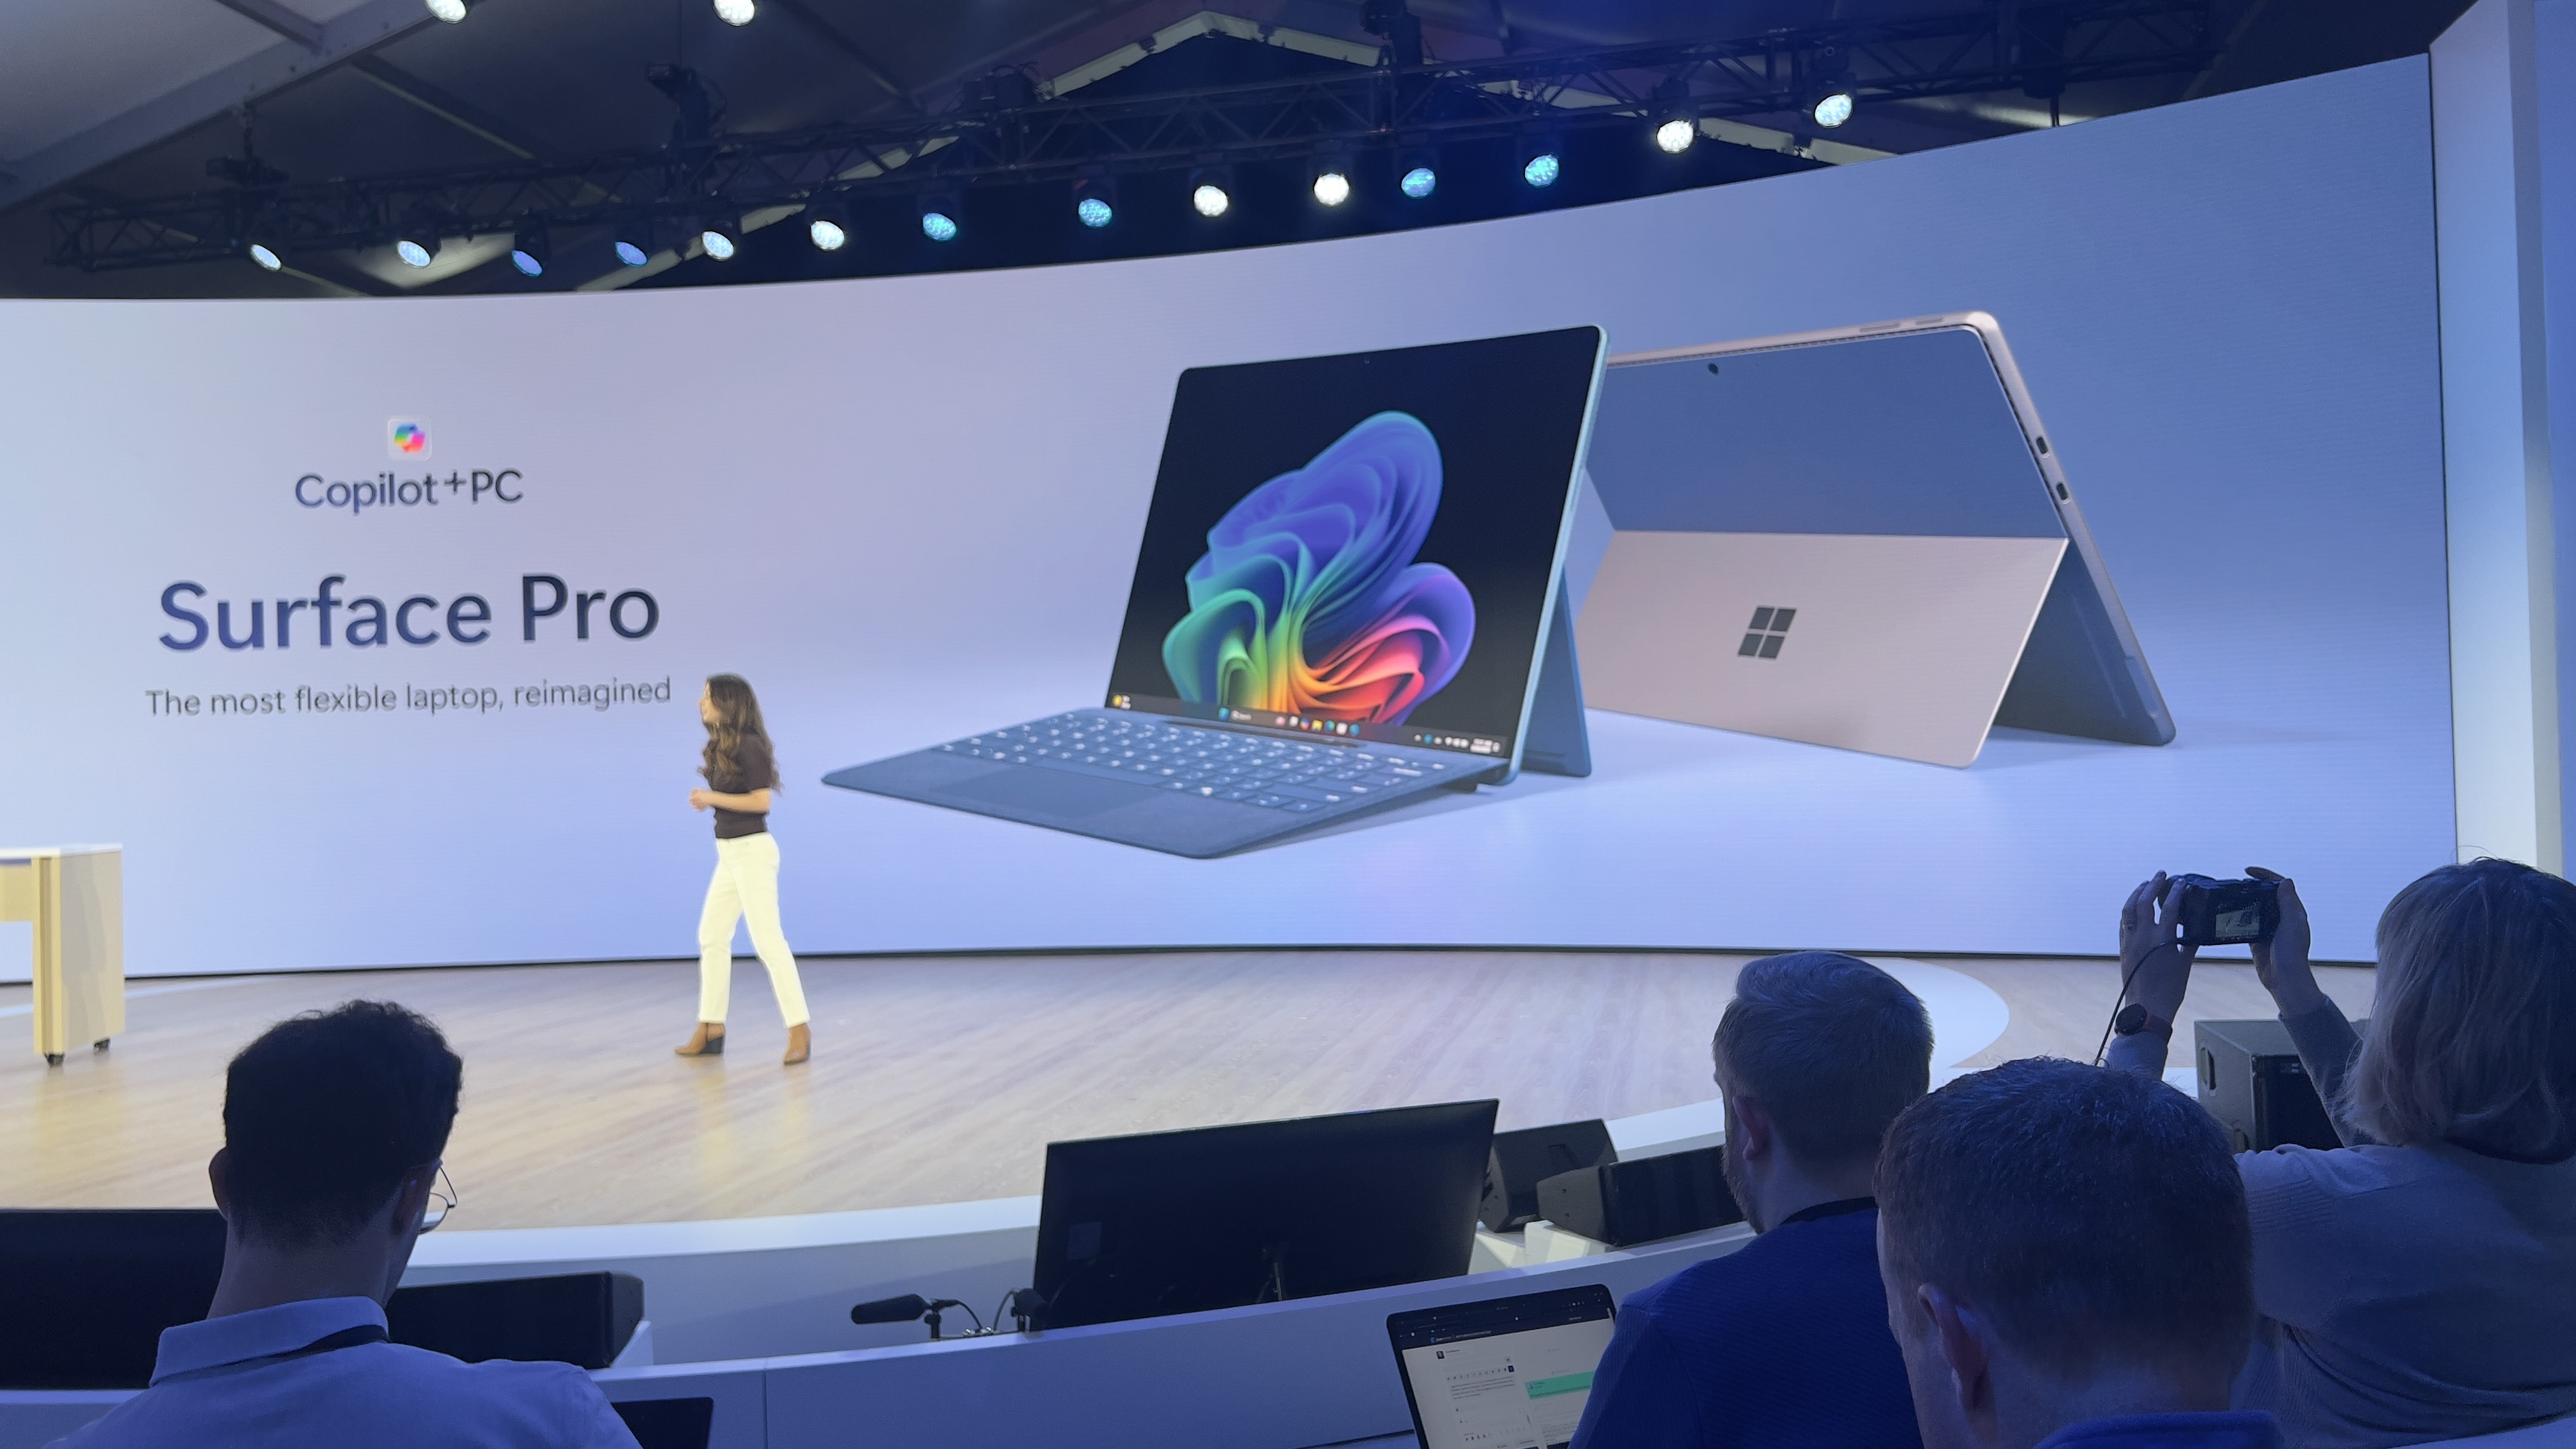 A shot from Microsoft's AI Era live event, showing off the new Surface Pro tablet.